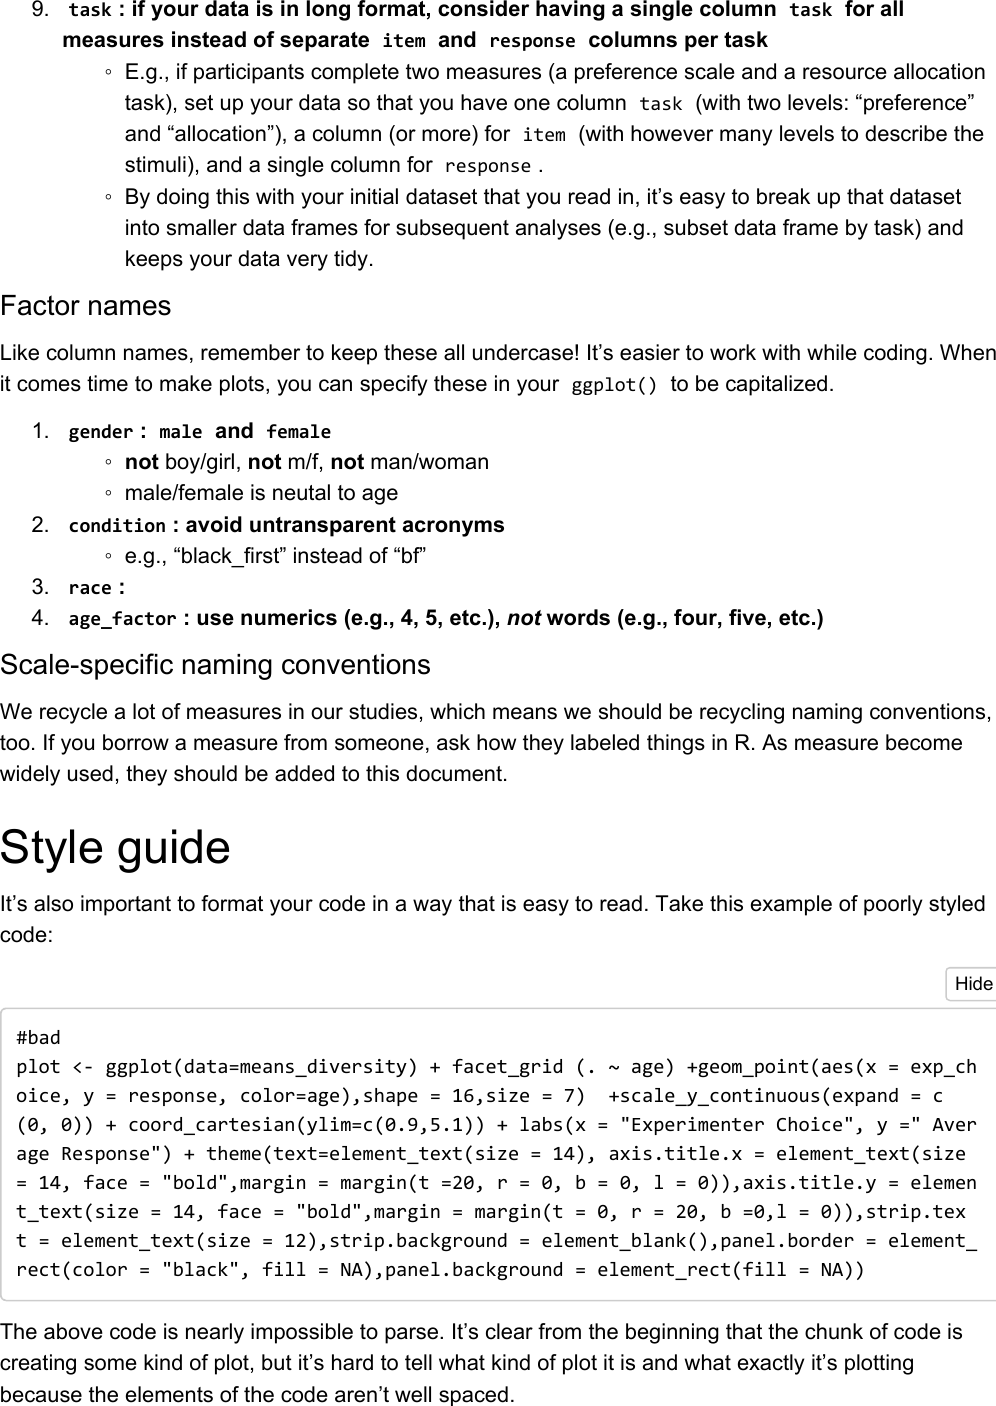 Page 4 of 8 - Style Guide And Naming Conventions For CSDC CDSC